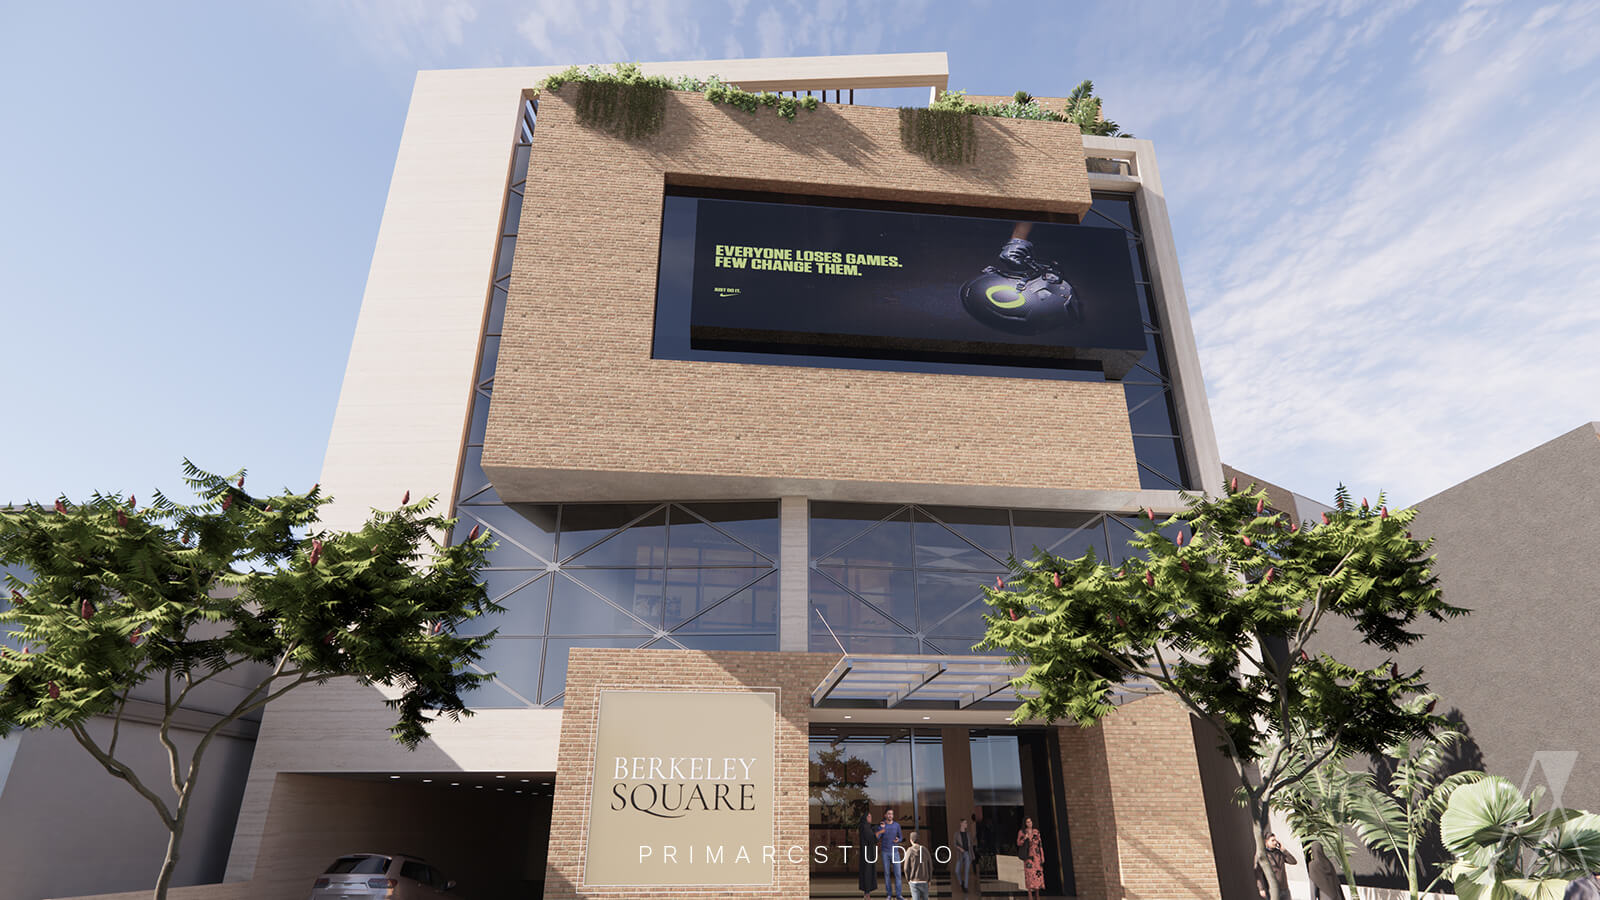 Exterior design of mall with windows, bricks and concrete and greenery